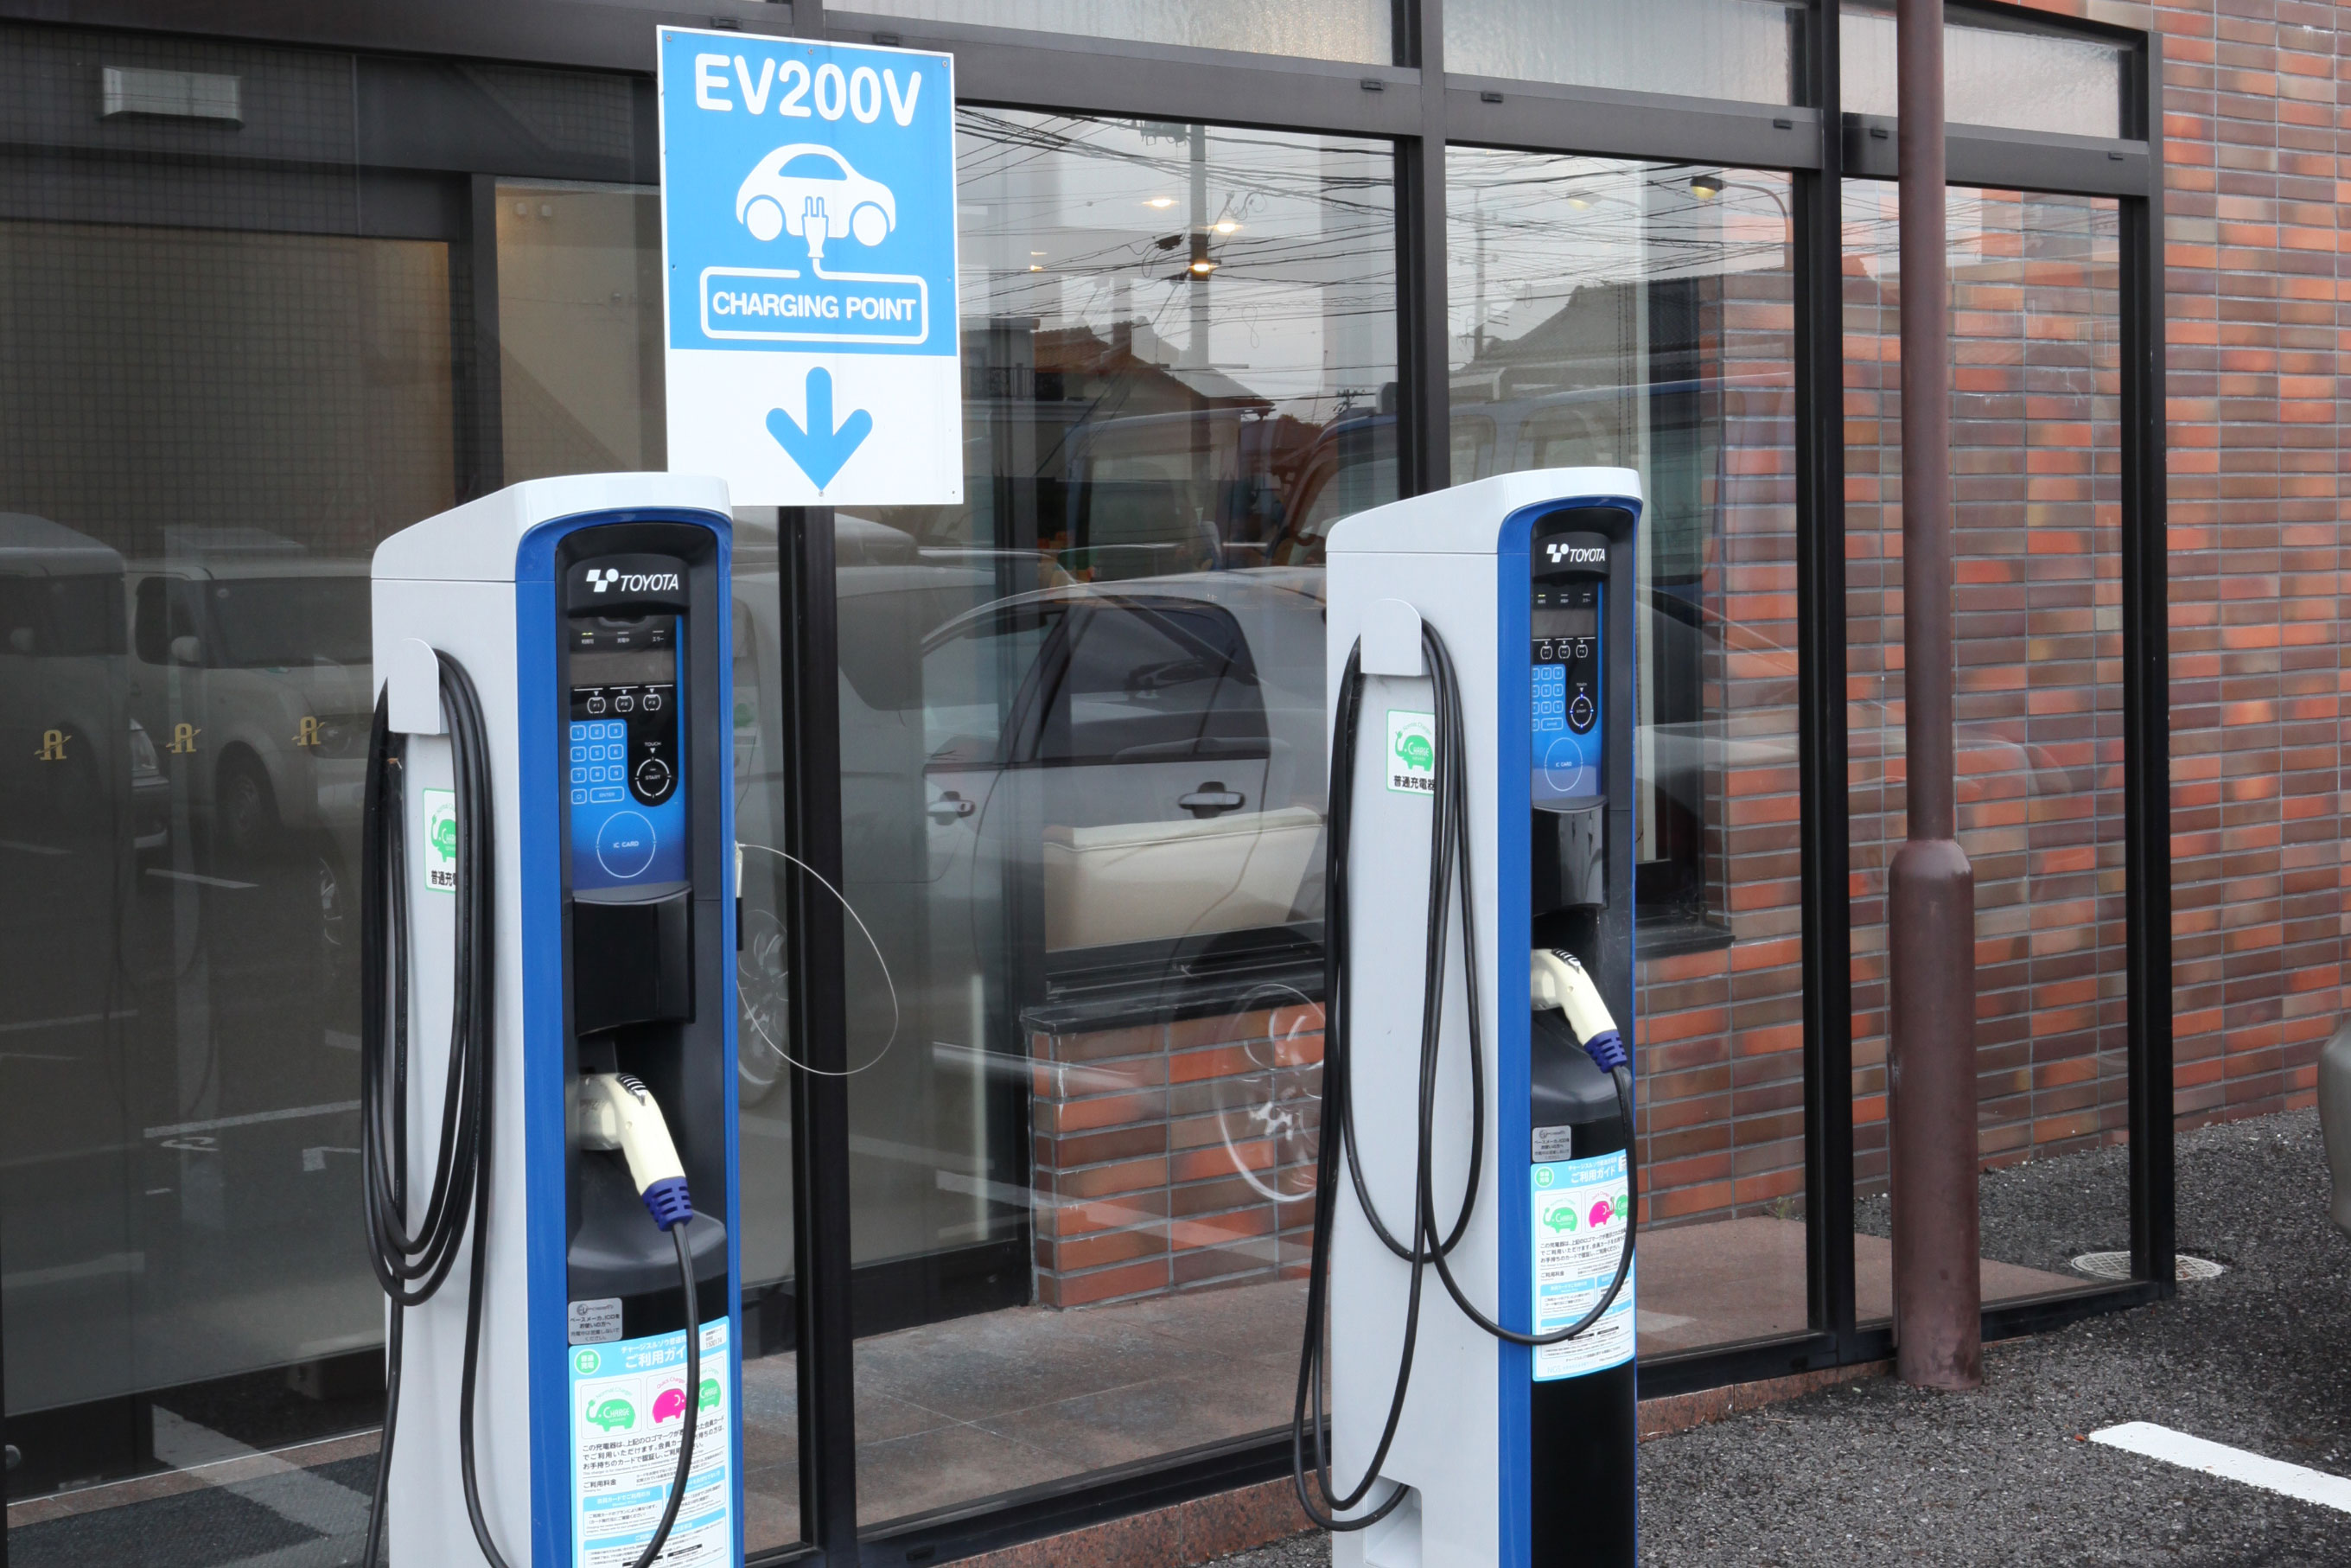 Equipped with electric car charger 